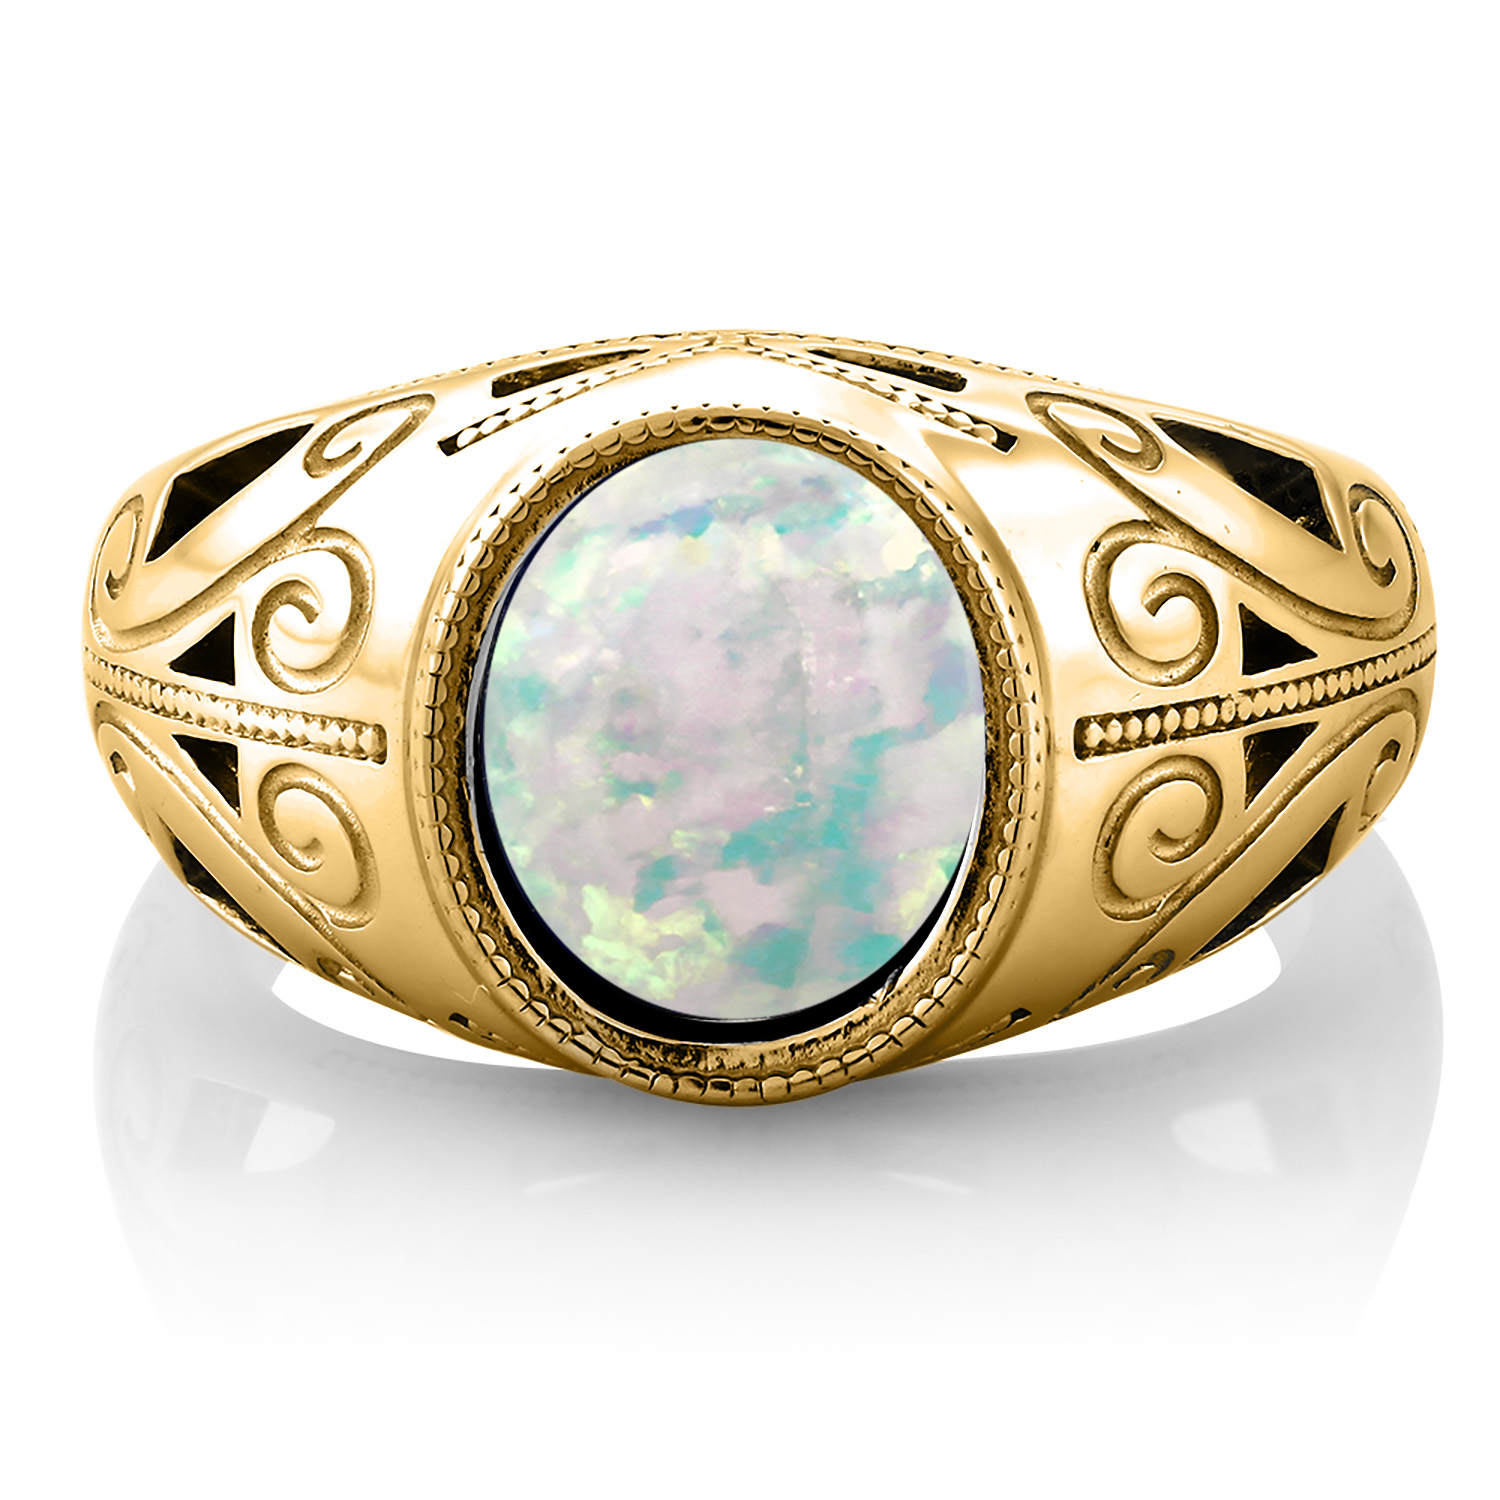 Gem Stone King 4.00 Ct Oval Cabochon White Simulated Opal 18K Yellow Gold Plated Silver Men's Ring